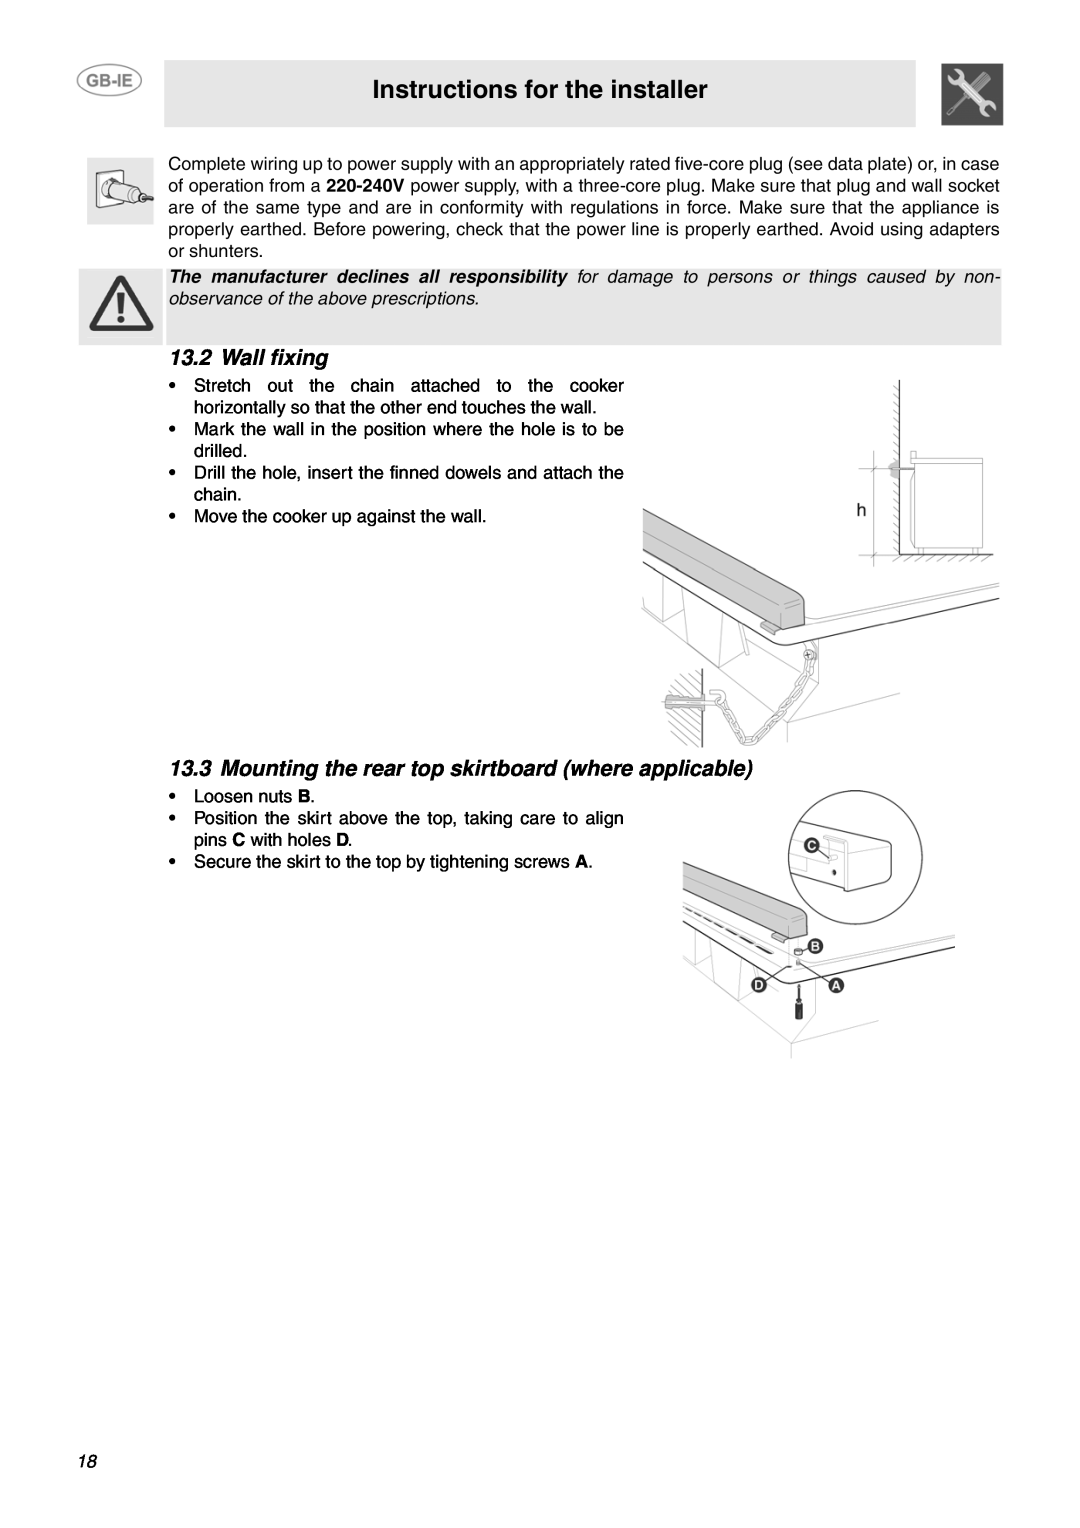 Smeg SUK91CMX5 manual Wall fixing, Mounting the rear top skirtboard where applicable, Instructions for the installer 